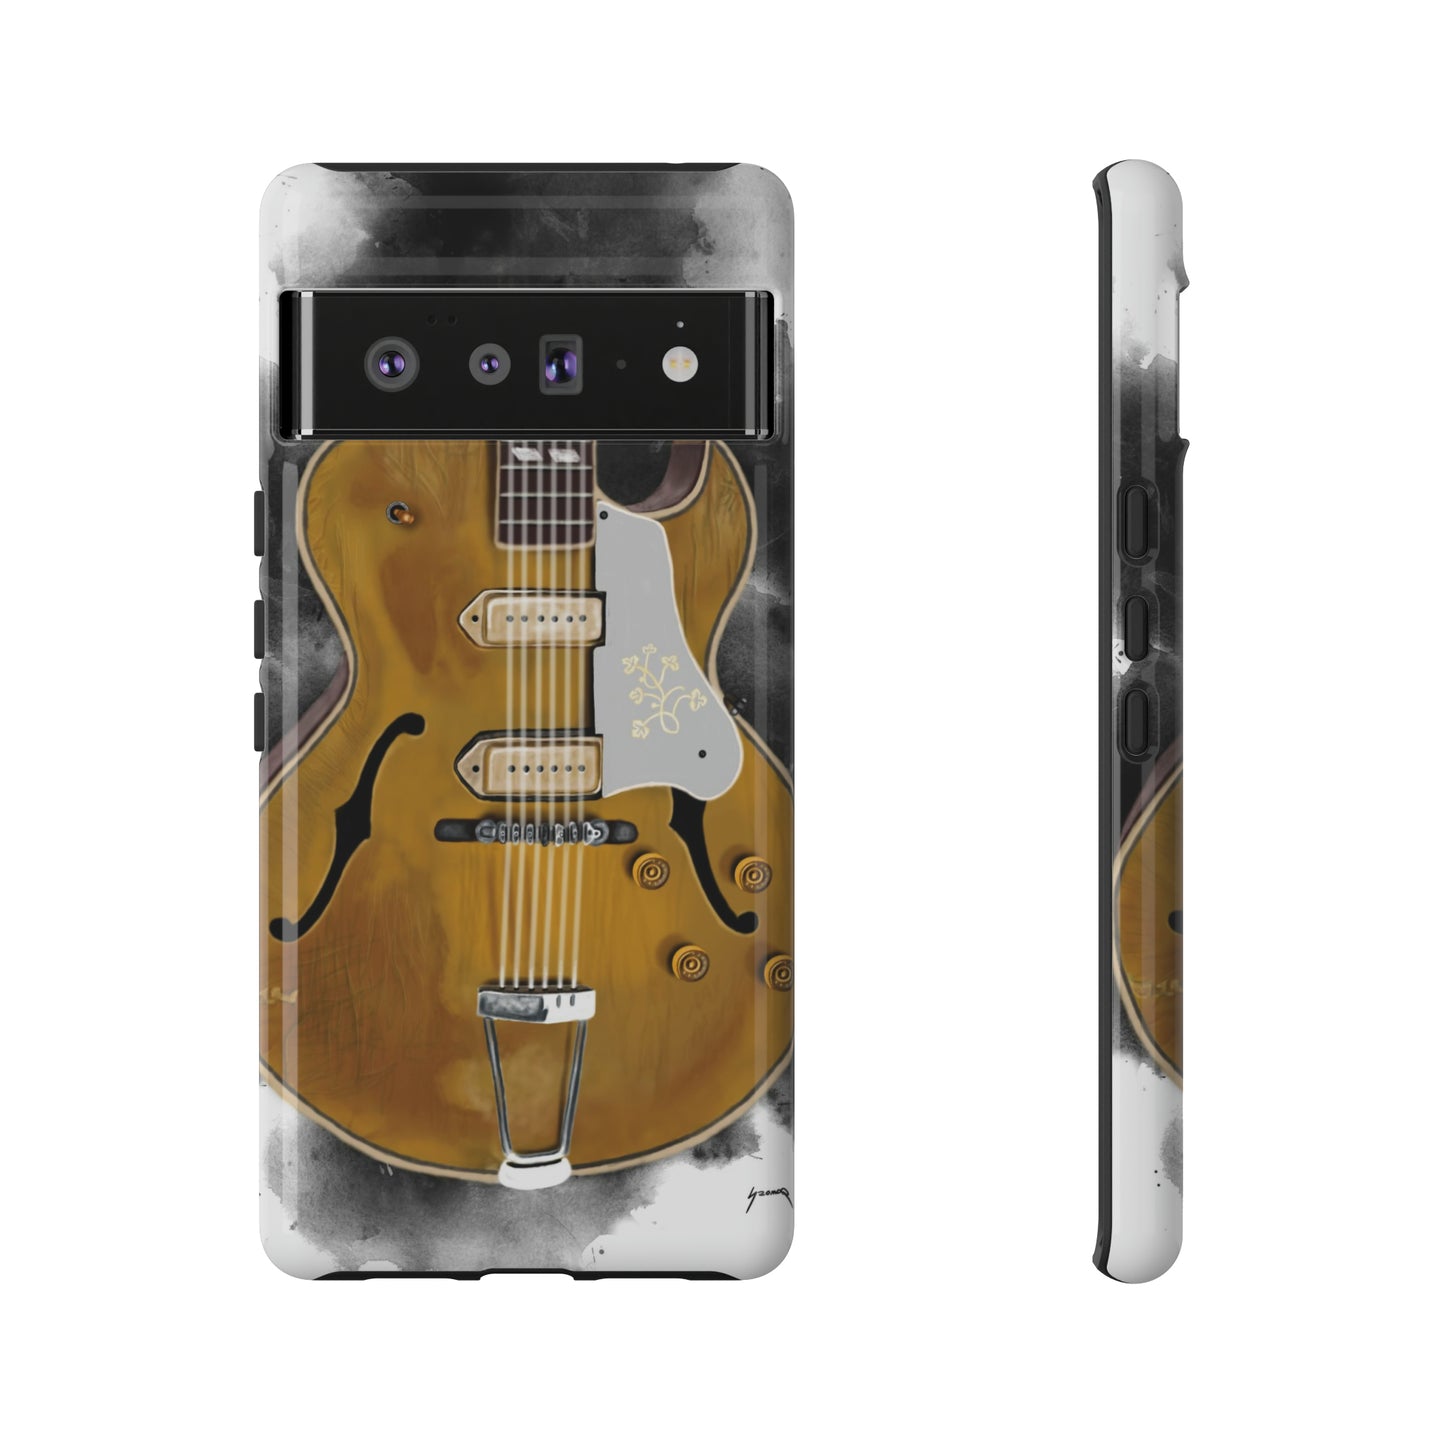 Digital painting of a goldtop vintage electric guitar printed on a google phone case